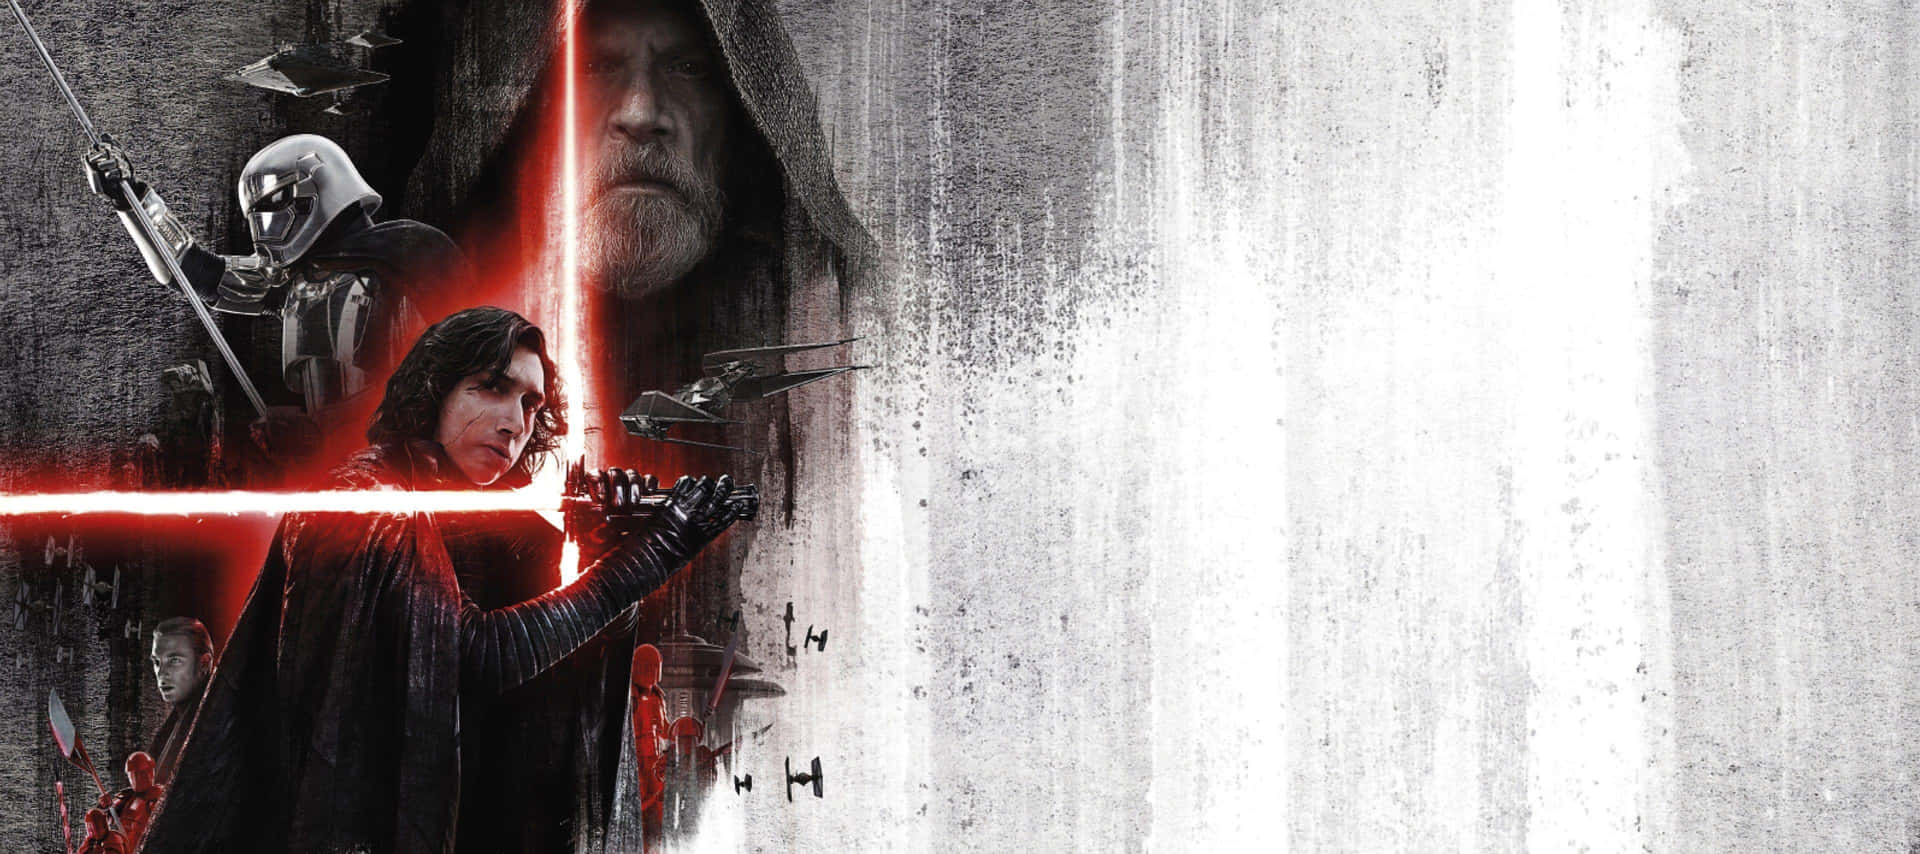 A Jedi Warrior Crosses Lightsabers with a Sith Wallpaper